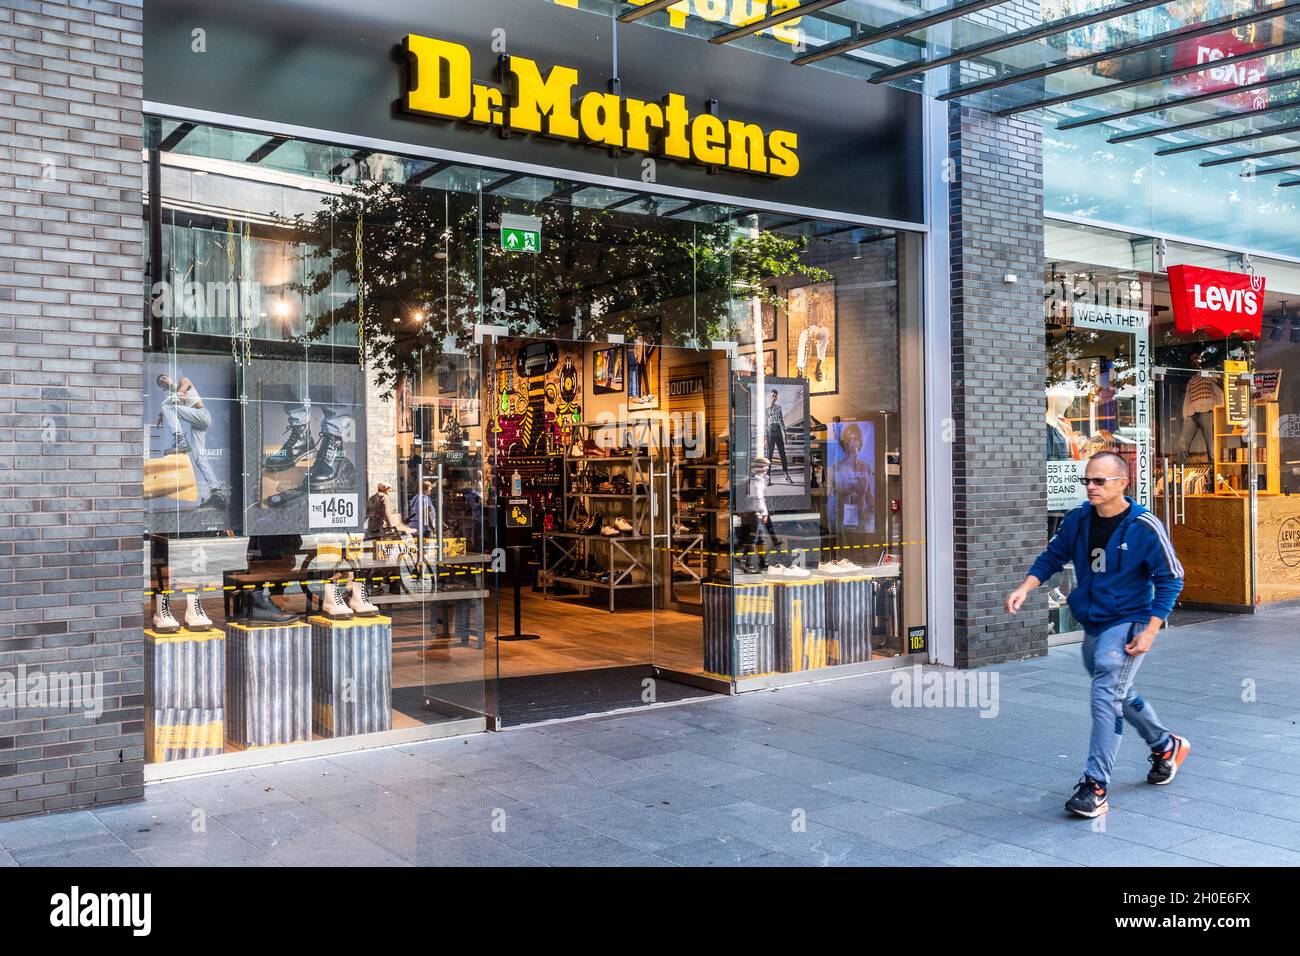 Exterior of Dr. Martens shoe and clothing shop in Liverpool, Merseyside, UK  Stock Photo - Alamy